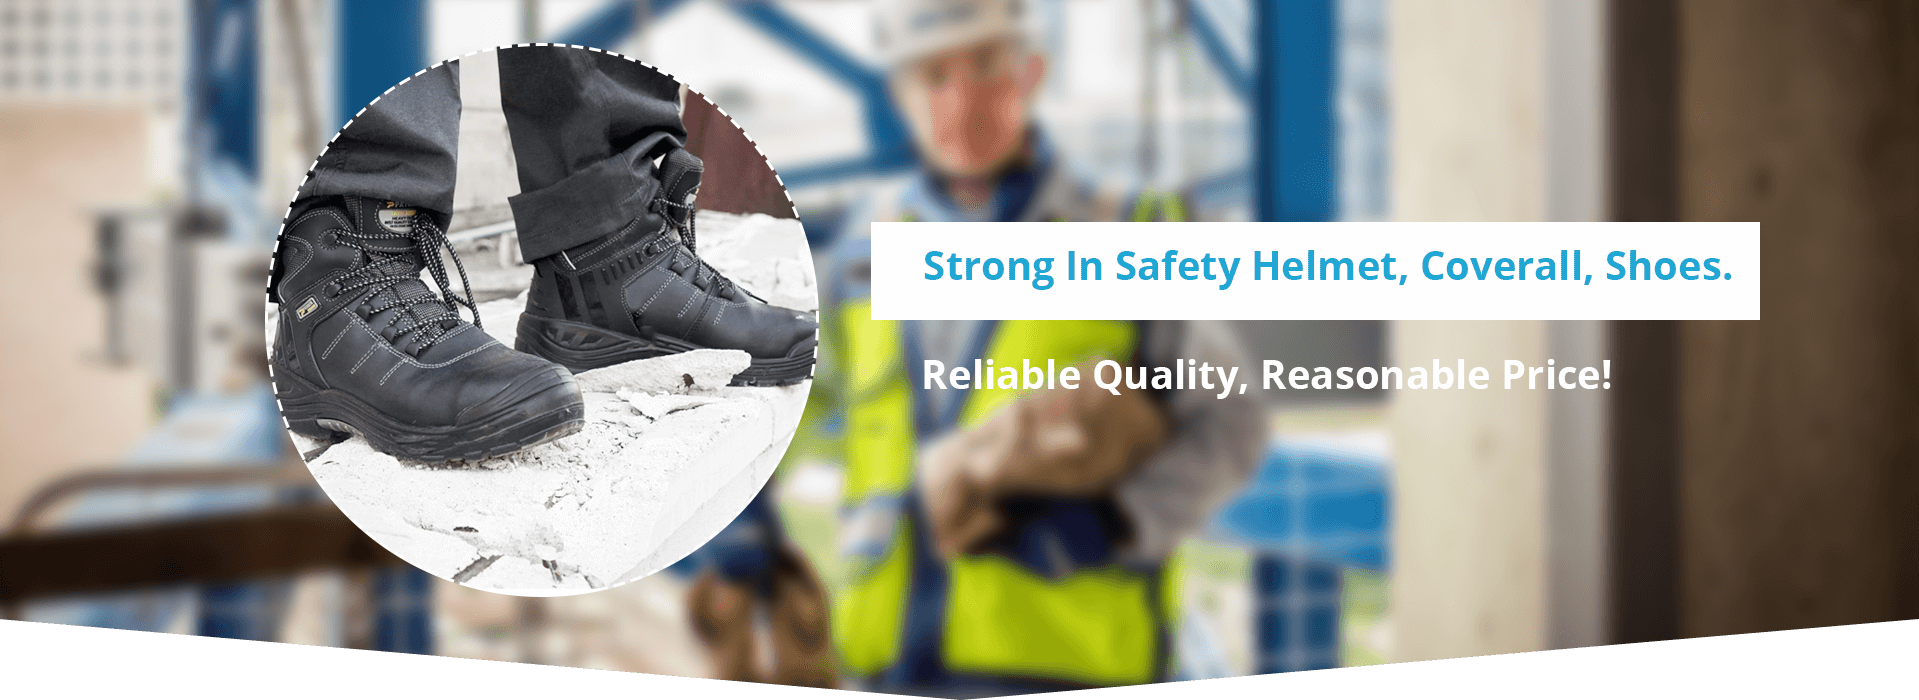 Strong in Safety Helmet, Coverall, Shoes